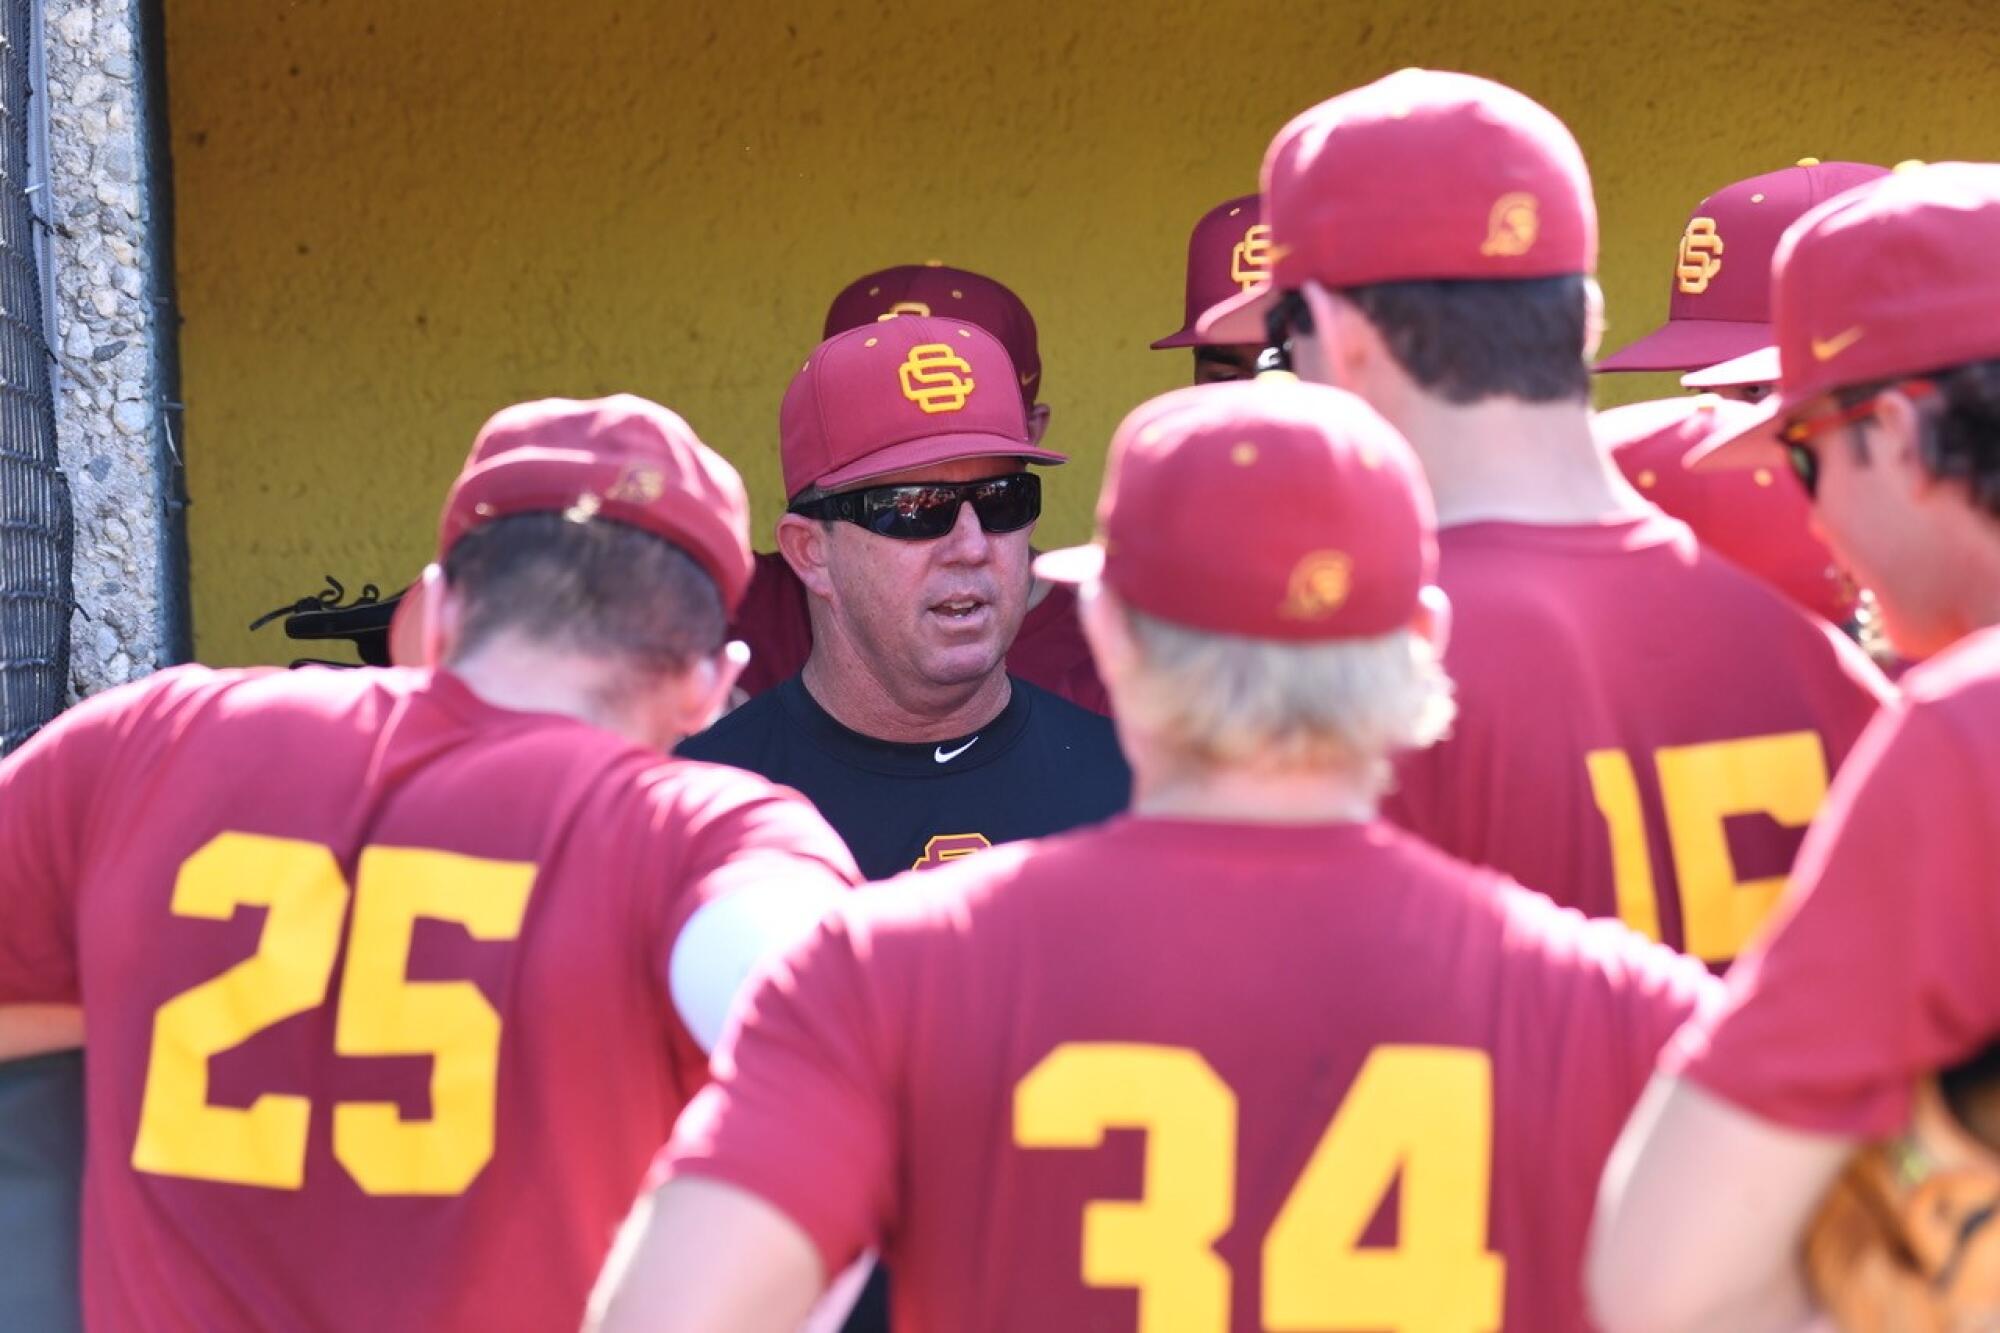 Jason Gill talks to his players during a practice at USC.